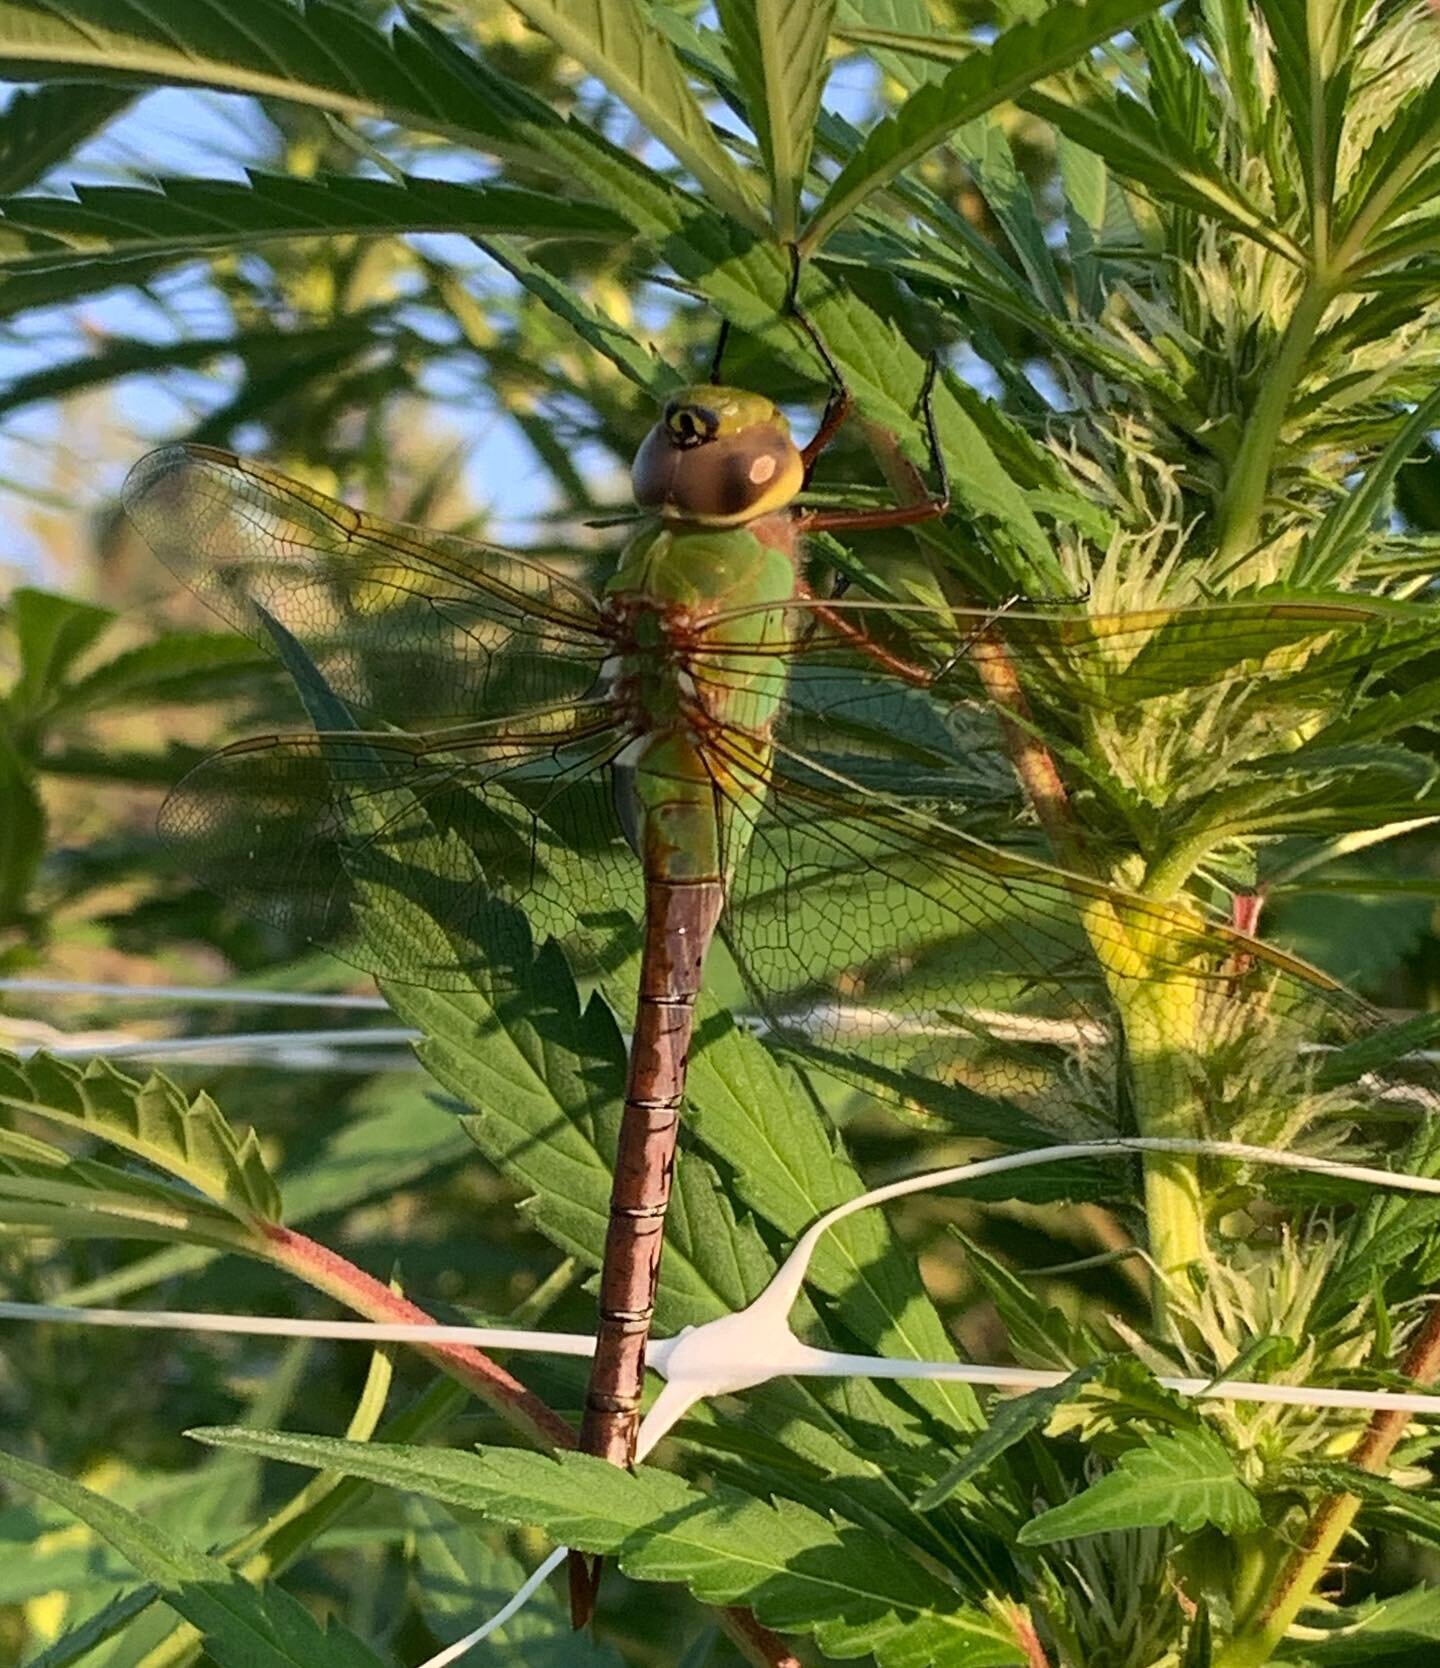 We ❤️ Dragonfly&rsquo;s.  #dragonfly #nature #cannabis #cbdoil #california